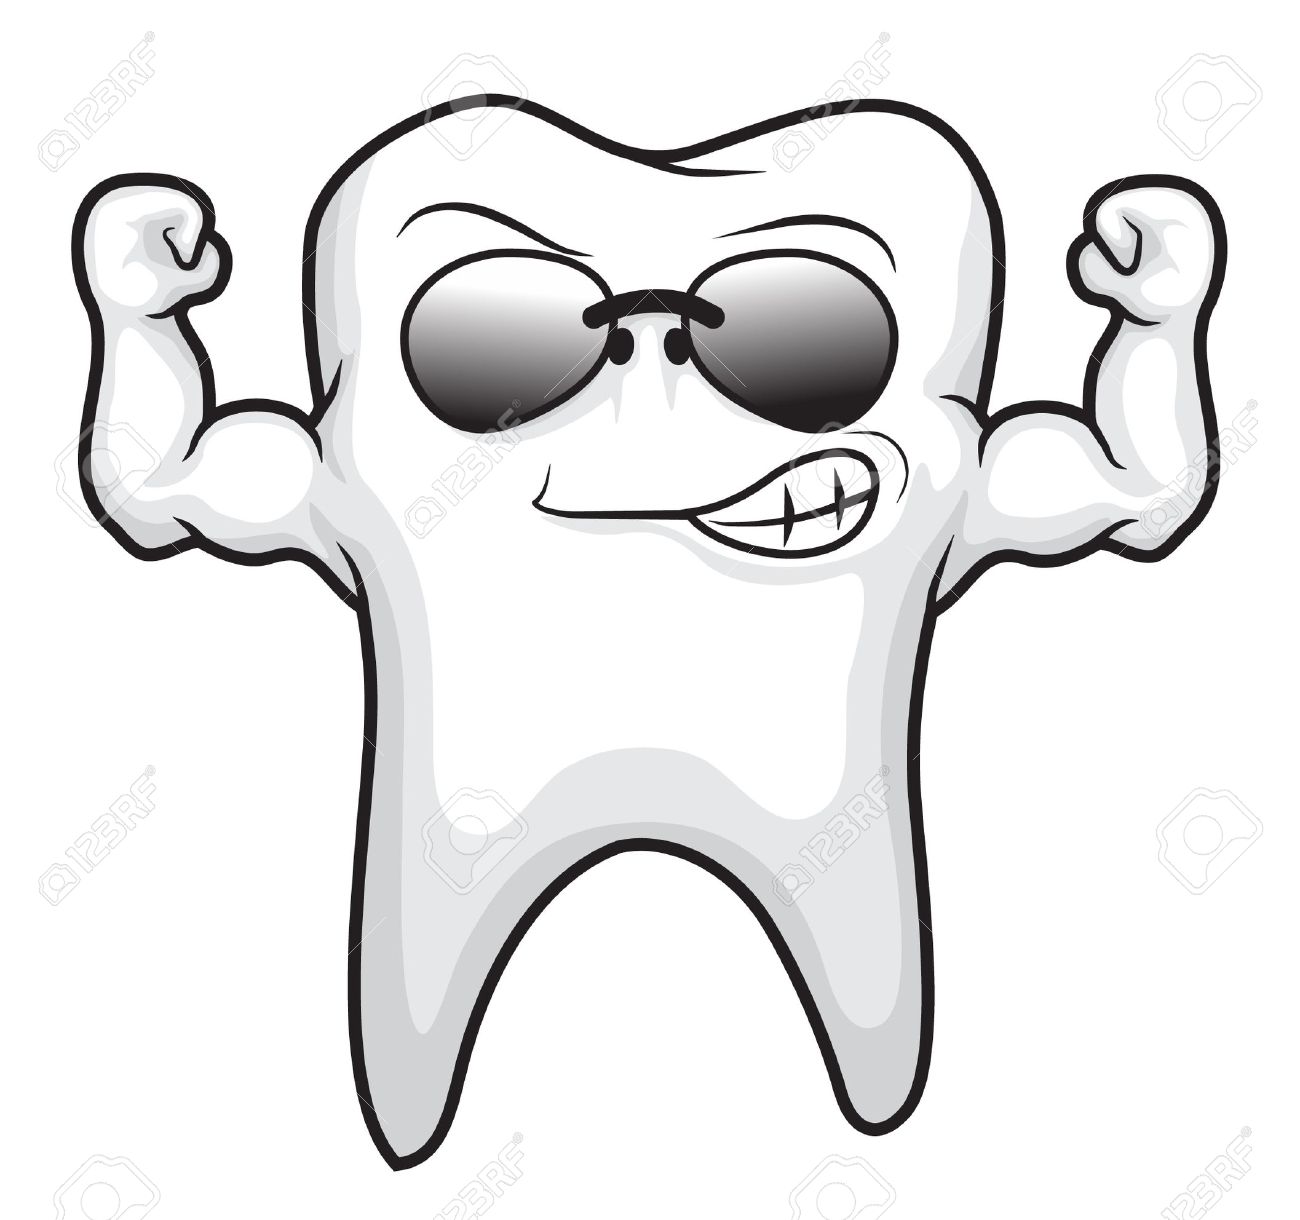 Cartoon Tooth Images Free Download On ClipArtMag.